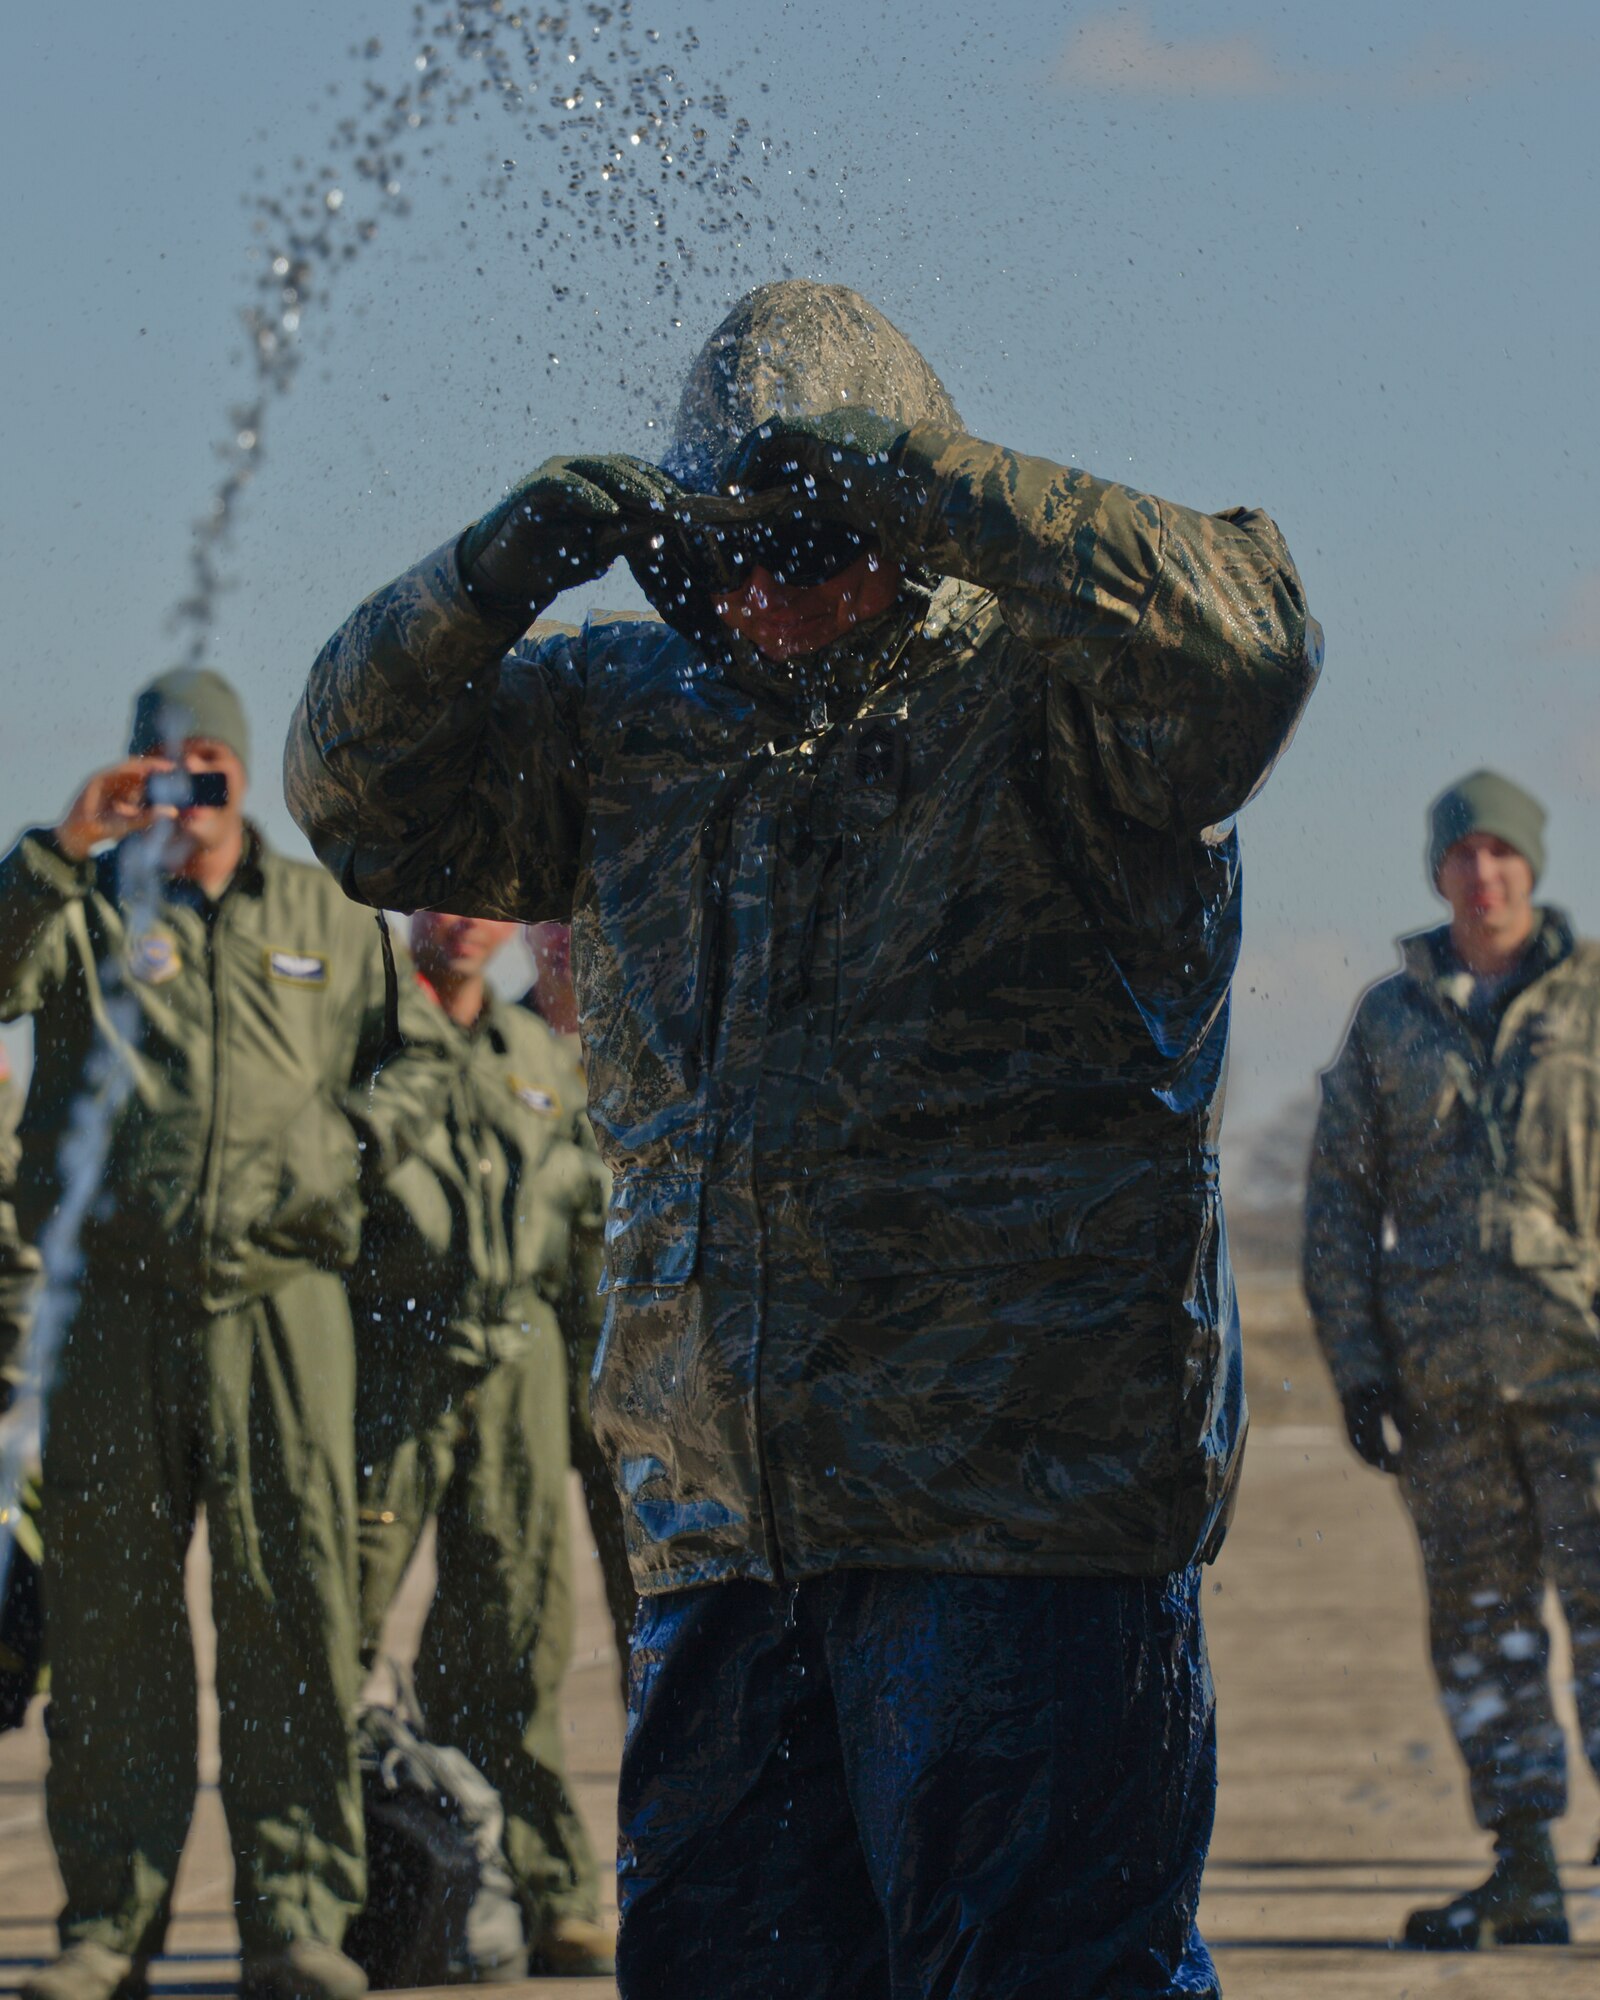 Airmen from the 133rd Airlift Wing spray a bridge of water over Chief Master Sgt. Jim Ricci, 109th Airlift Squadron in St. Paul, Minn., Mar. 16, 2013. Ricci is retiring from the military after over 35 years of service. 
(U.S. Air Force photo by Staff Sgt. Amy M. Lovgren/Released)